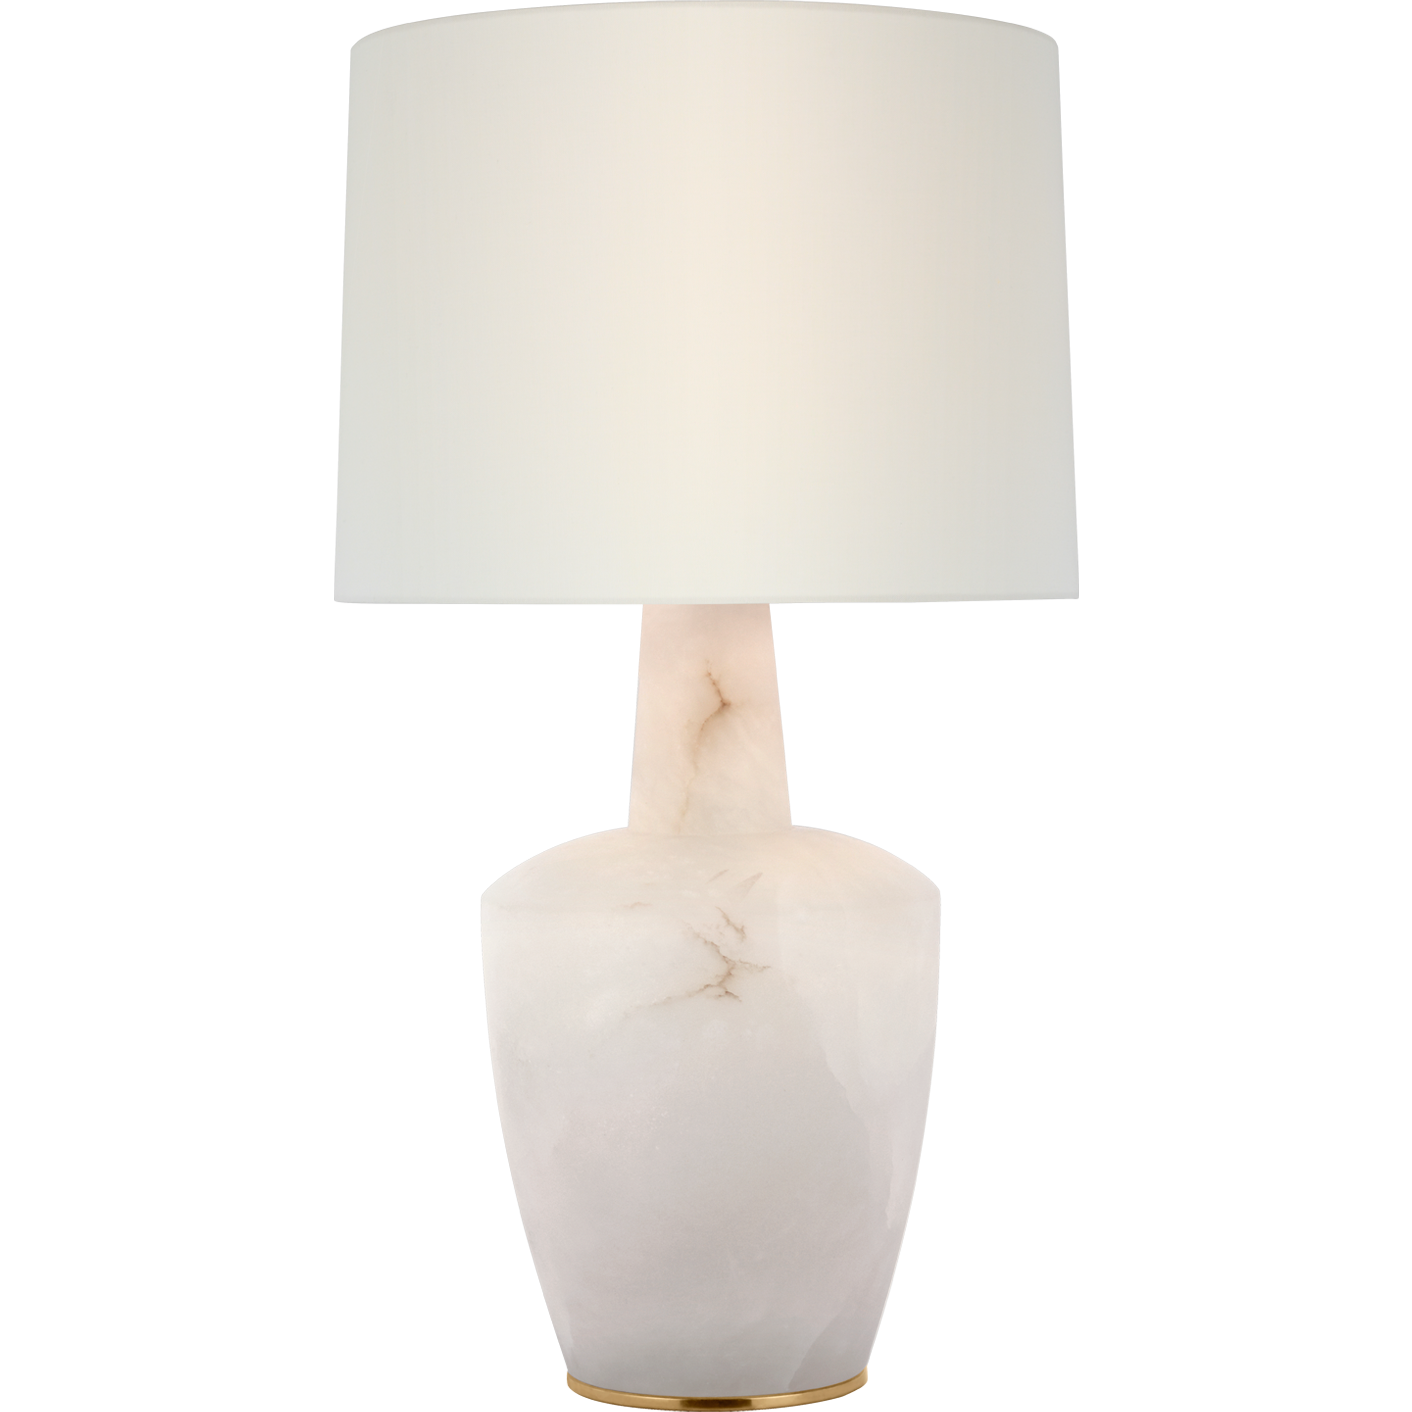 Paros 31" Table Lamp with Drum Shade